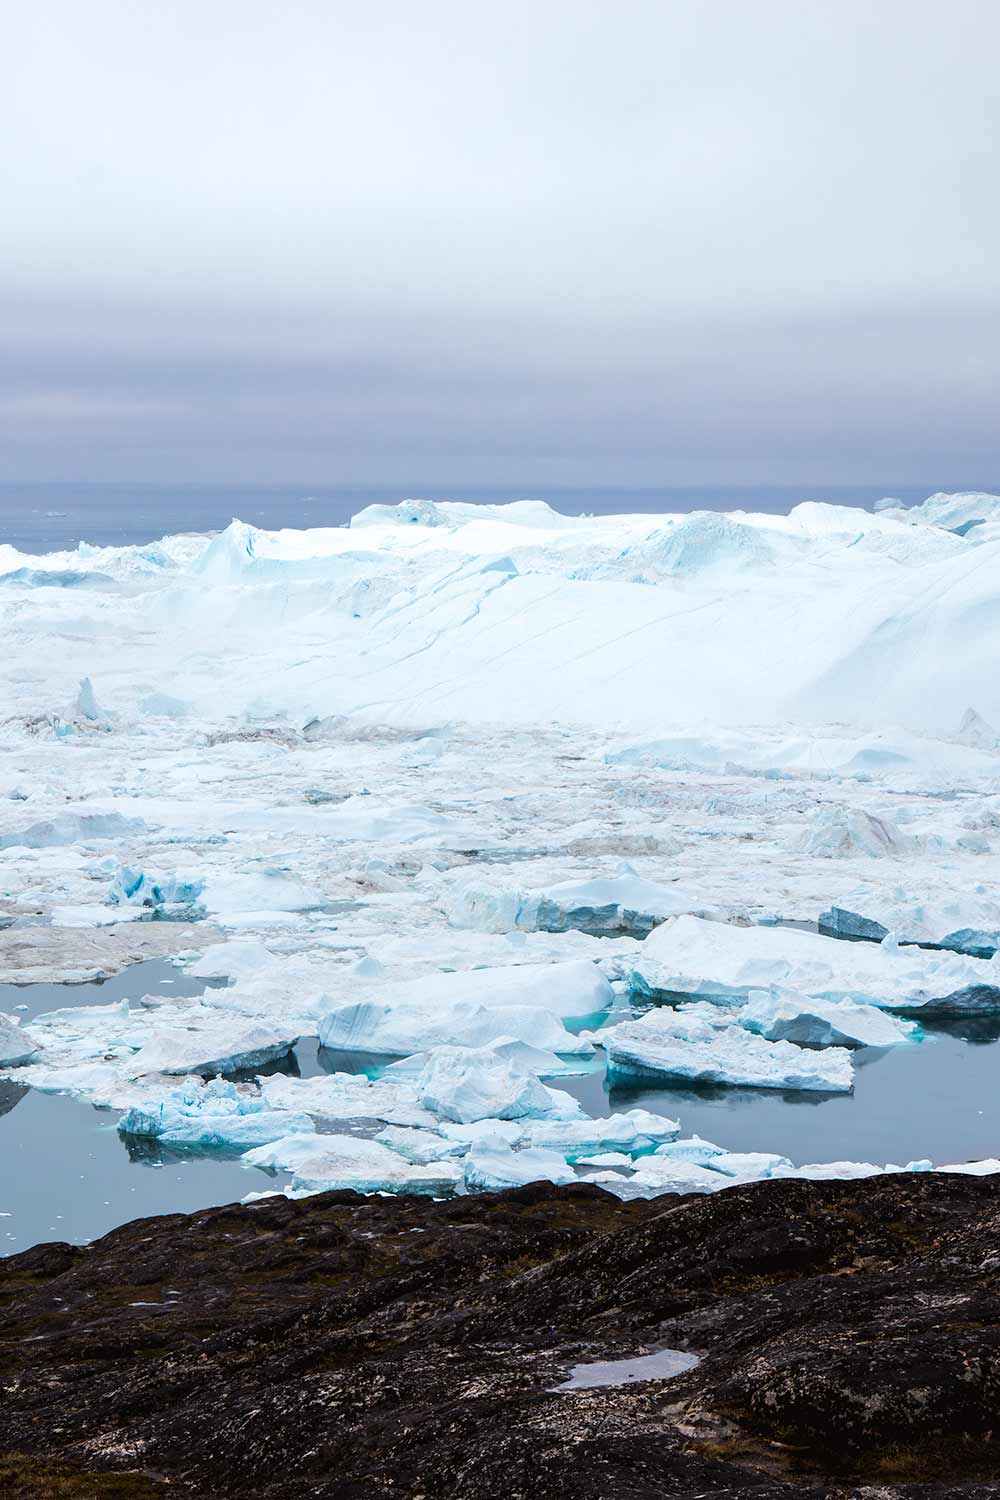 Ilulissat Icefjord: Captivating views on a 10-day Greenland summer journey